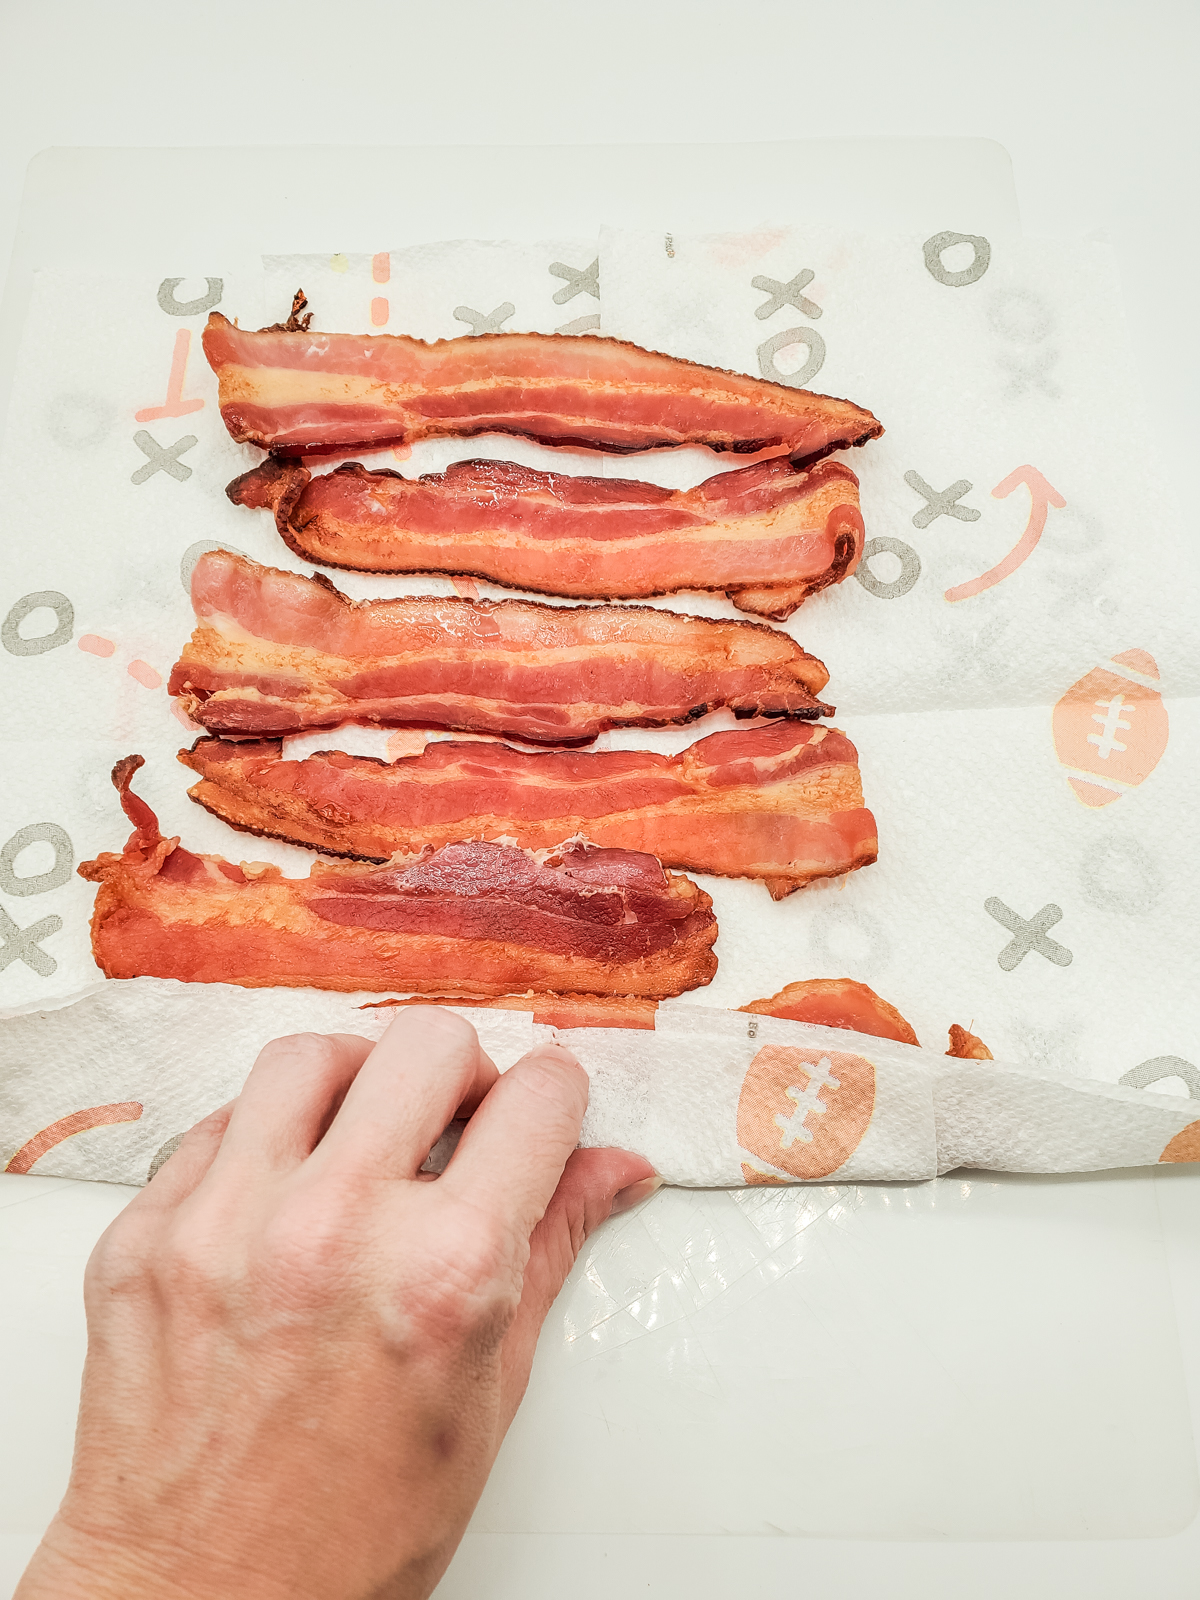 roll the strips of cooked bacon up in the paper towels